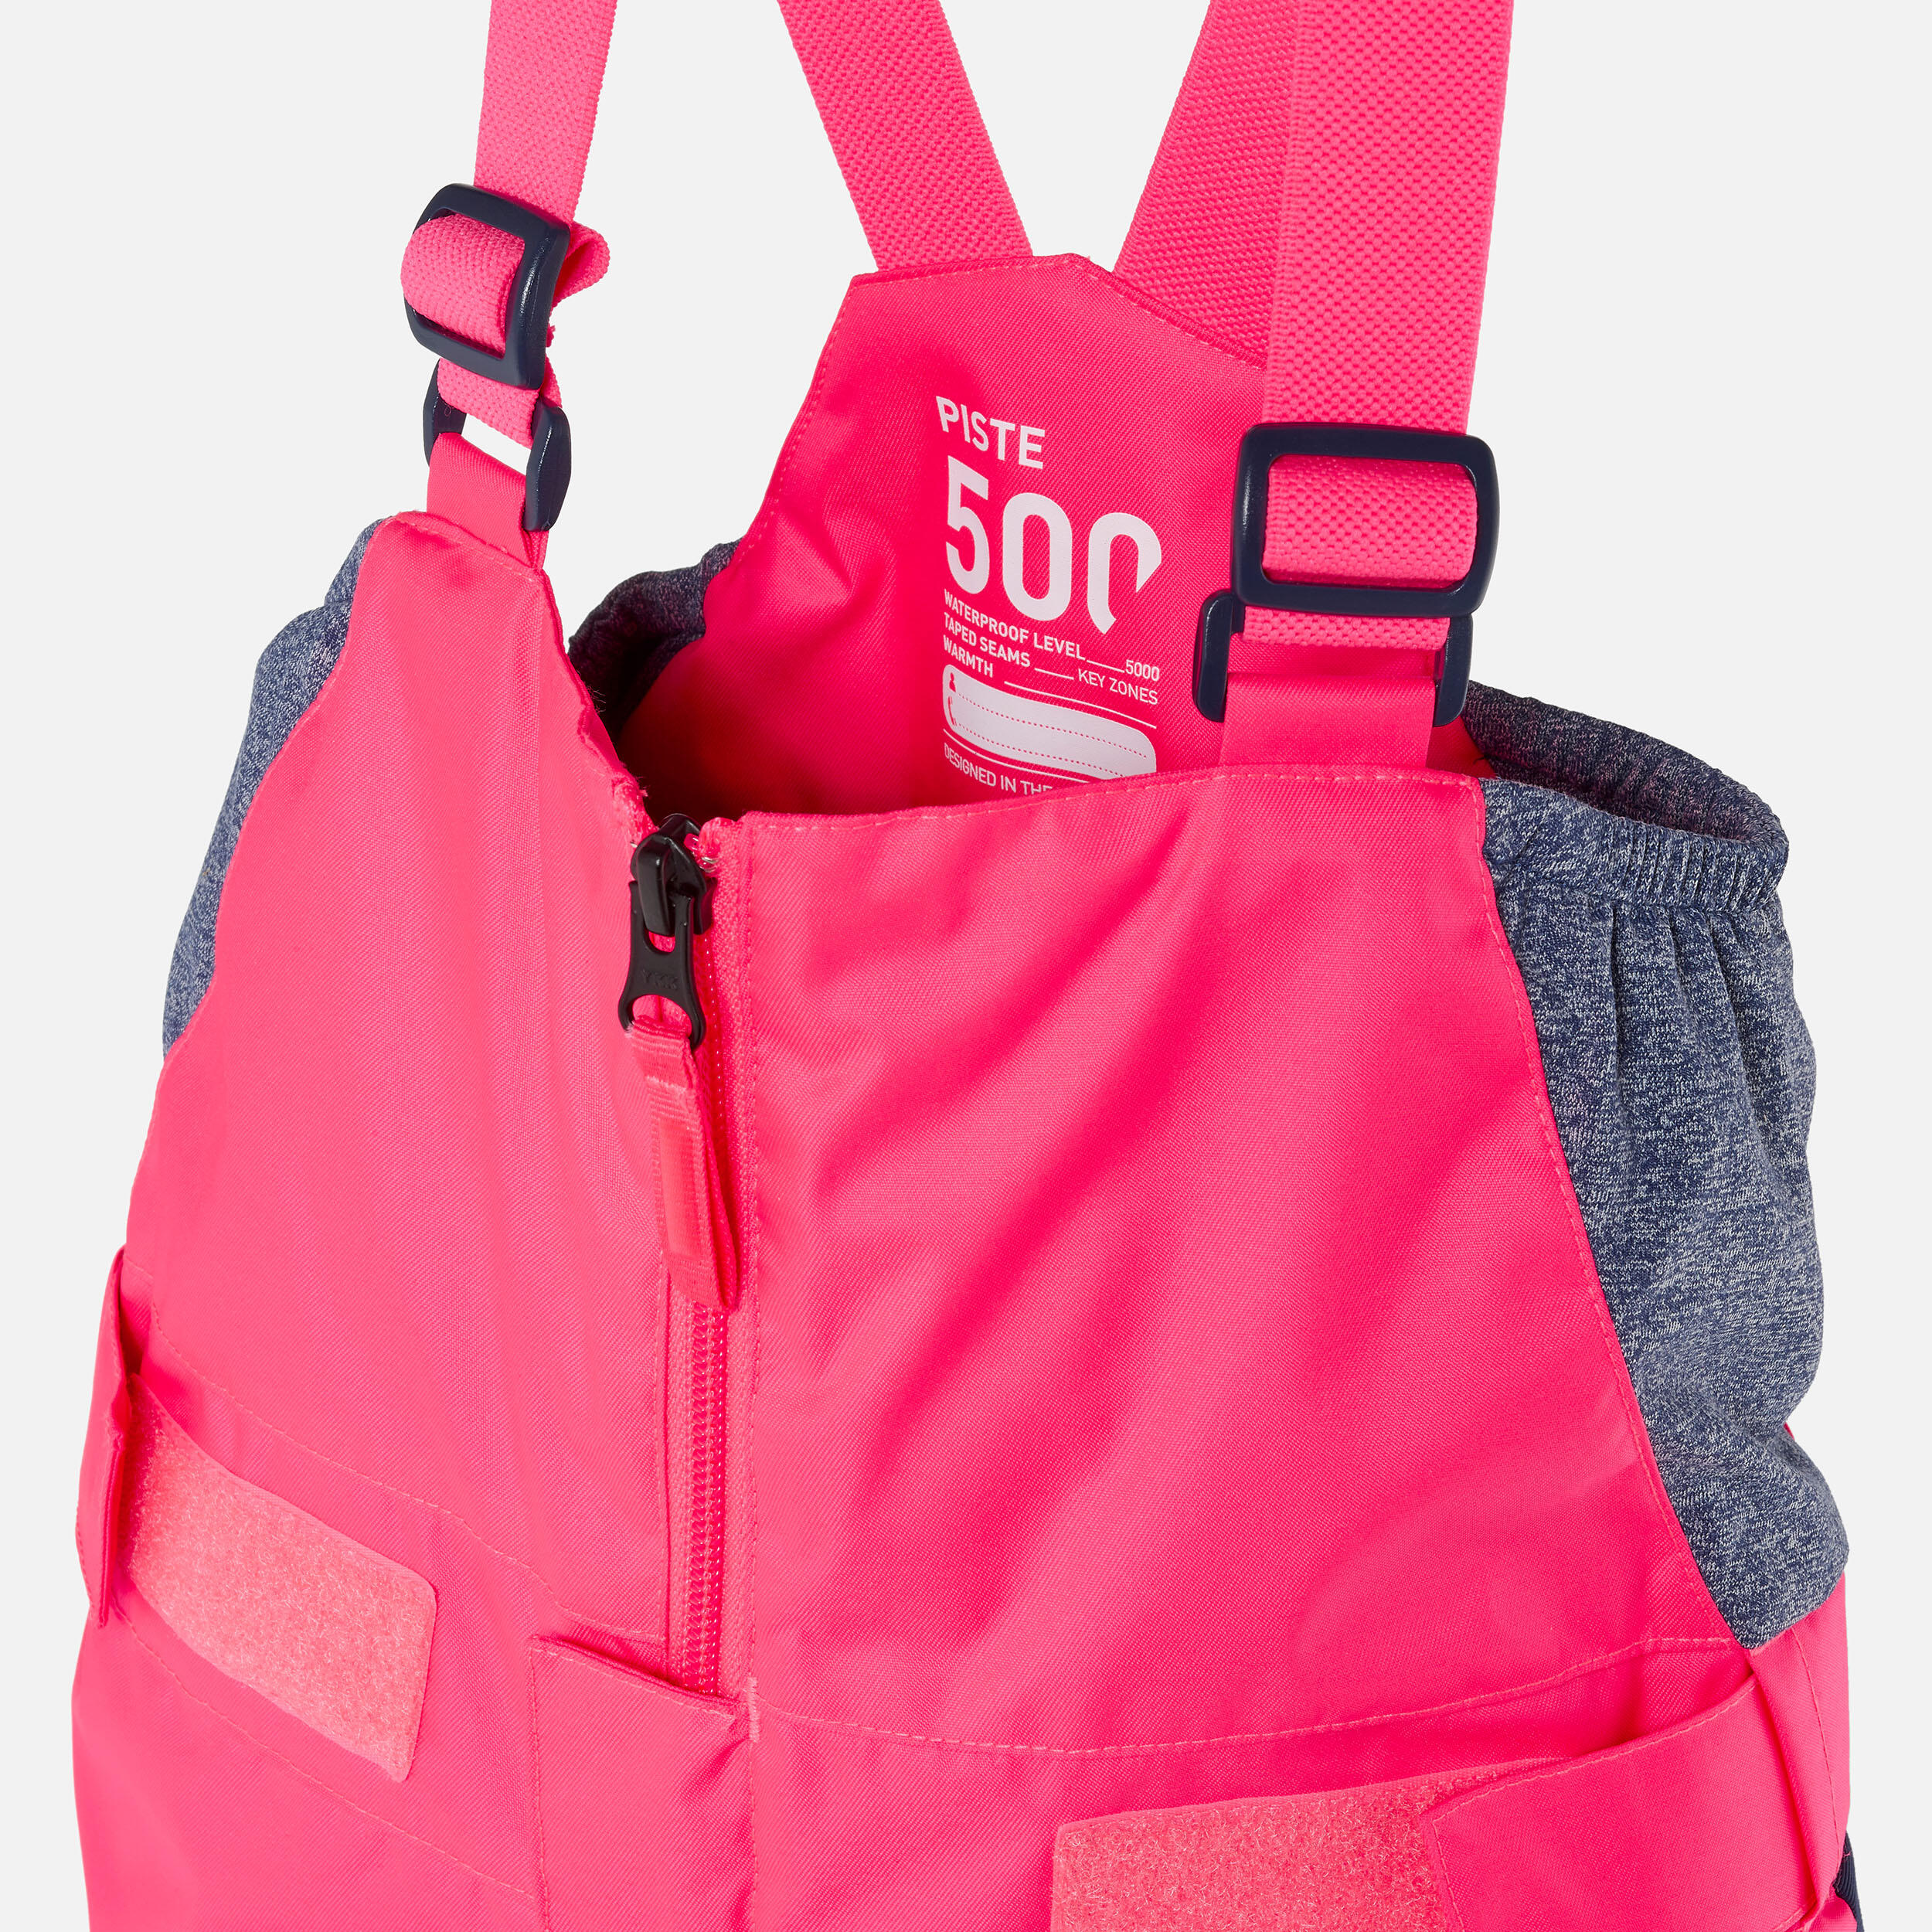 KIDS’ WARM AND WATERPROOF SKI DUNGAREES - 500 PNF - NEON PINK AND NAVY  5/6